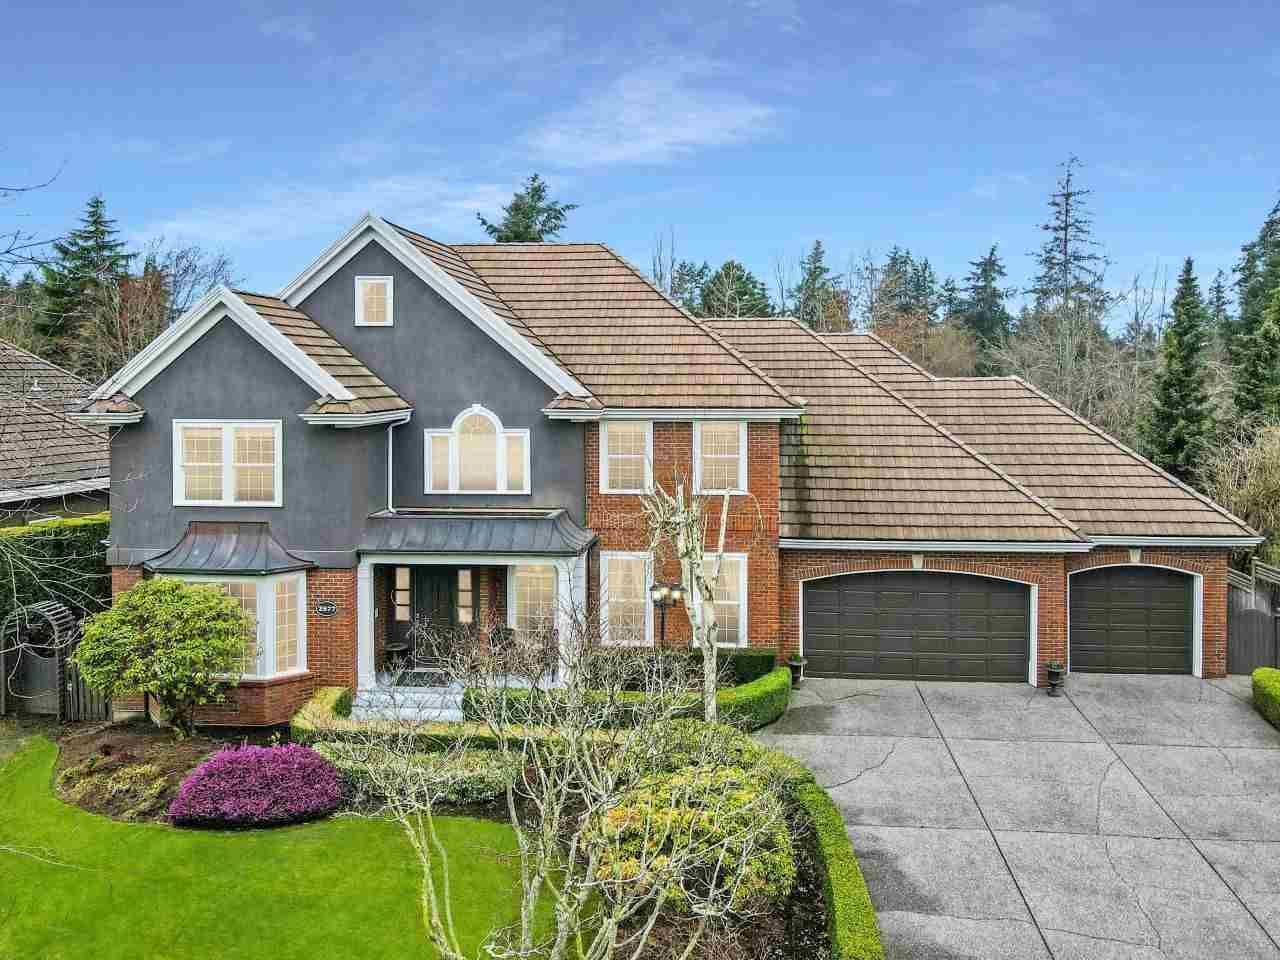 I have sold a property at 2577 138A ST in Surrey
